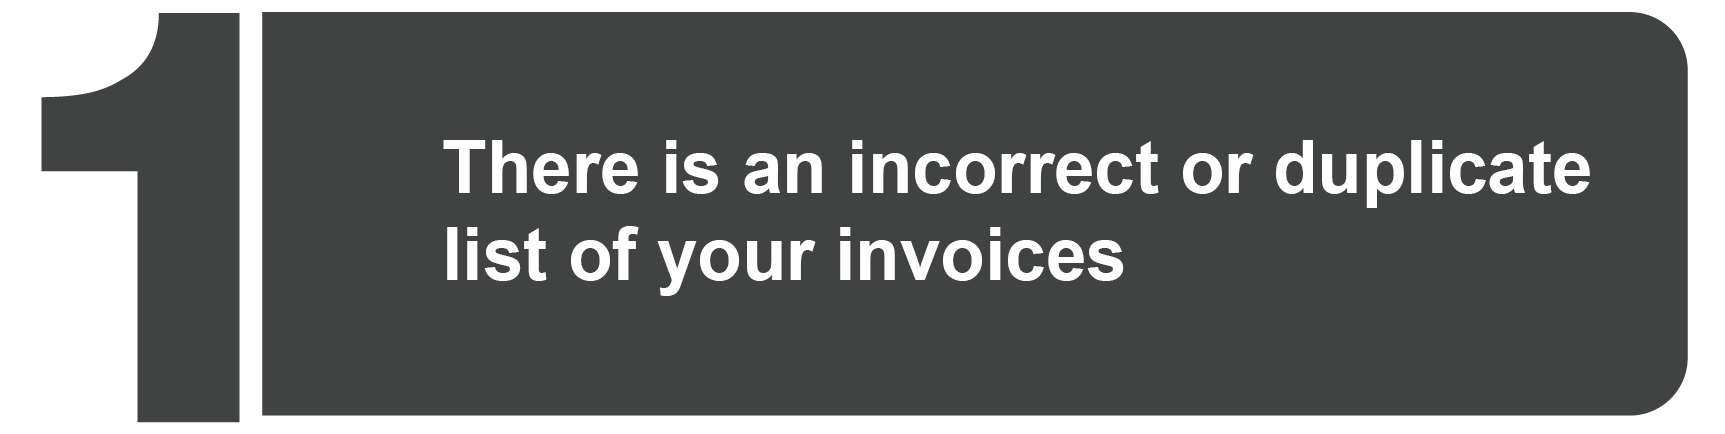 There is an incorrect or duplicate list of your invoices